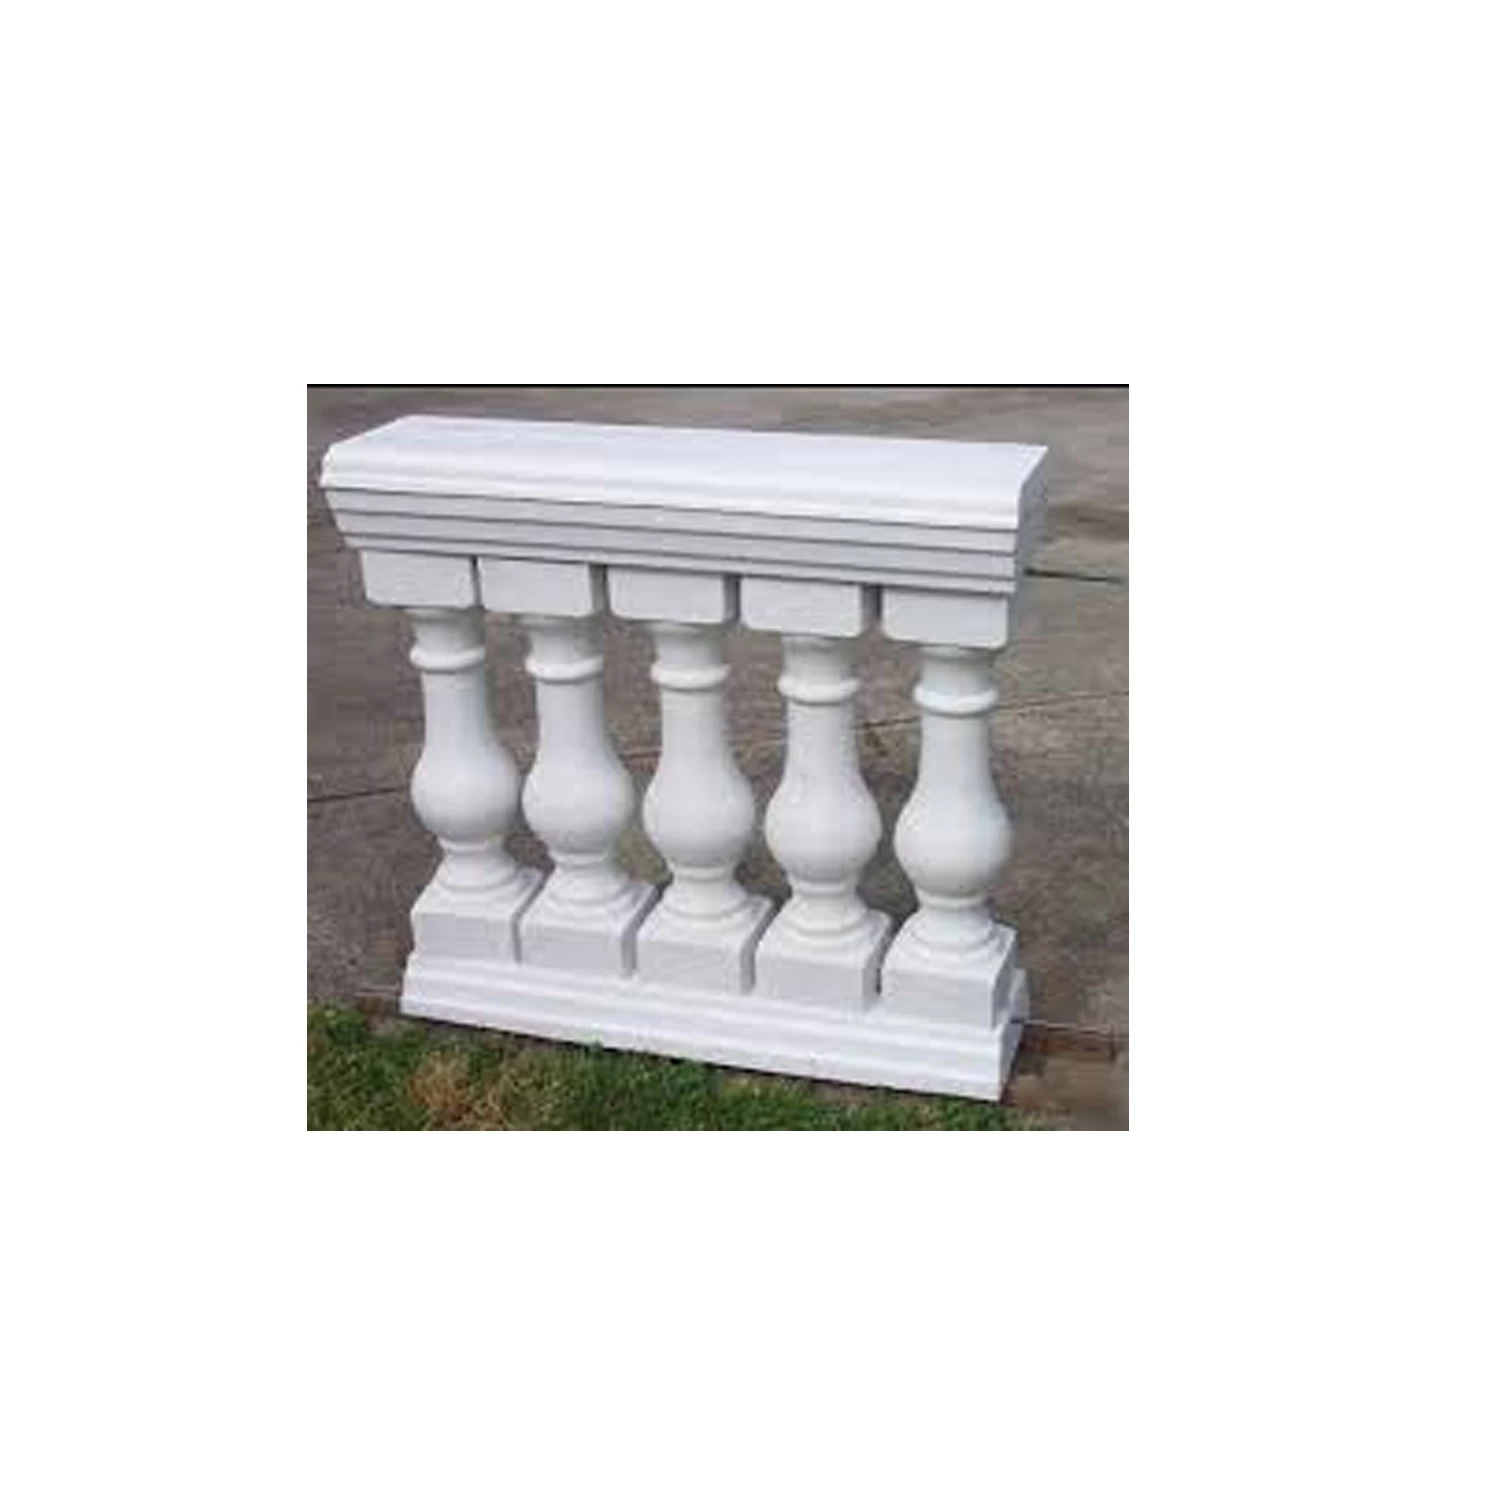 Exterior polyurethane baluster balustrade hanrail lowes for stairs